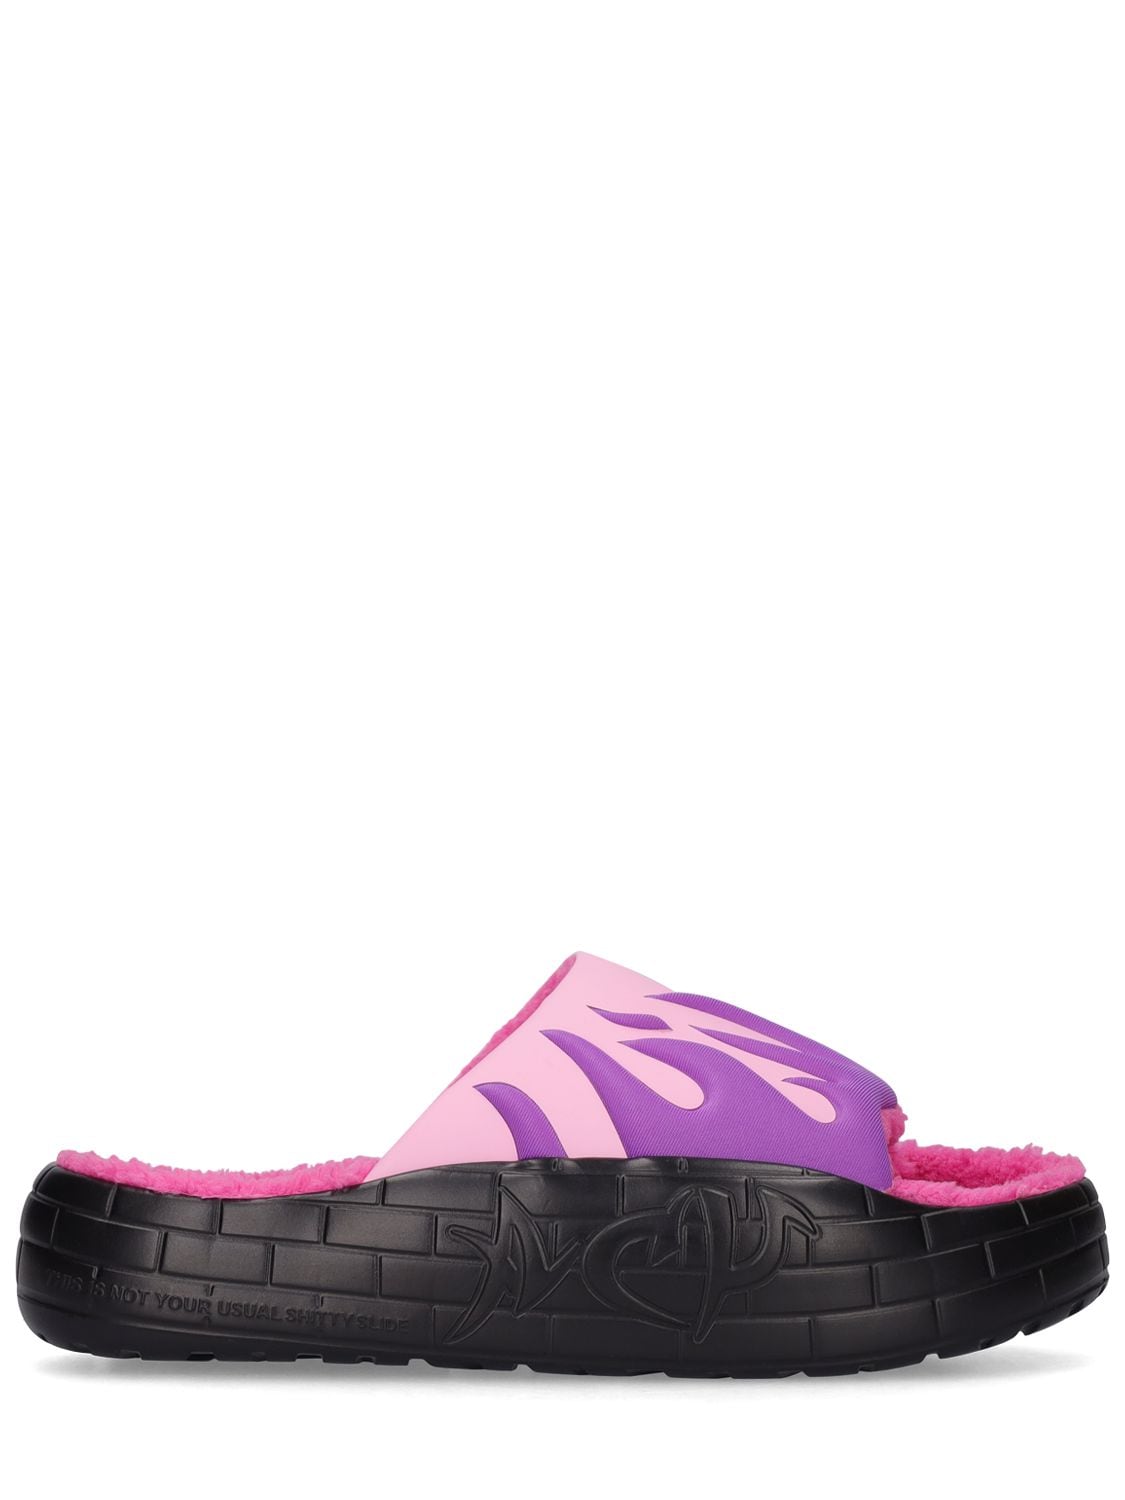 ACUPUNCTURE Nyu Flames Rubber Slide Sandals